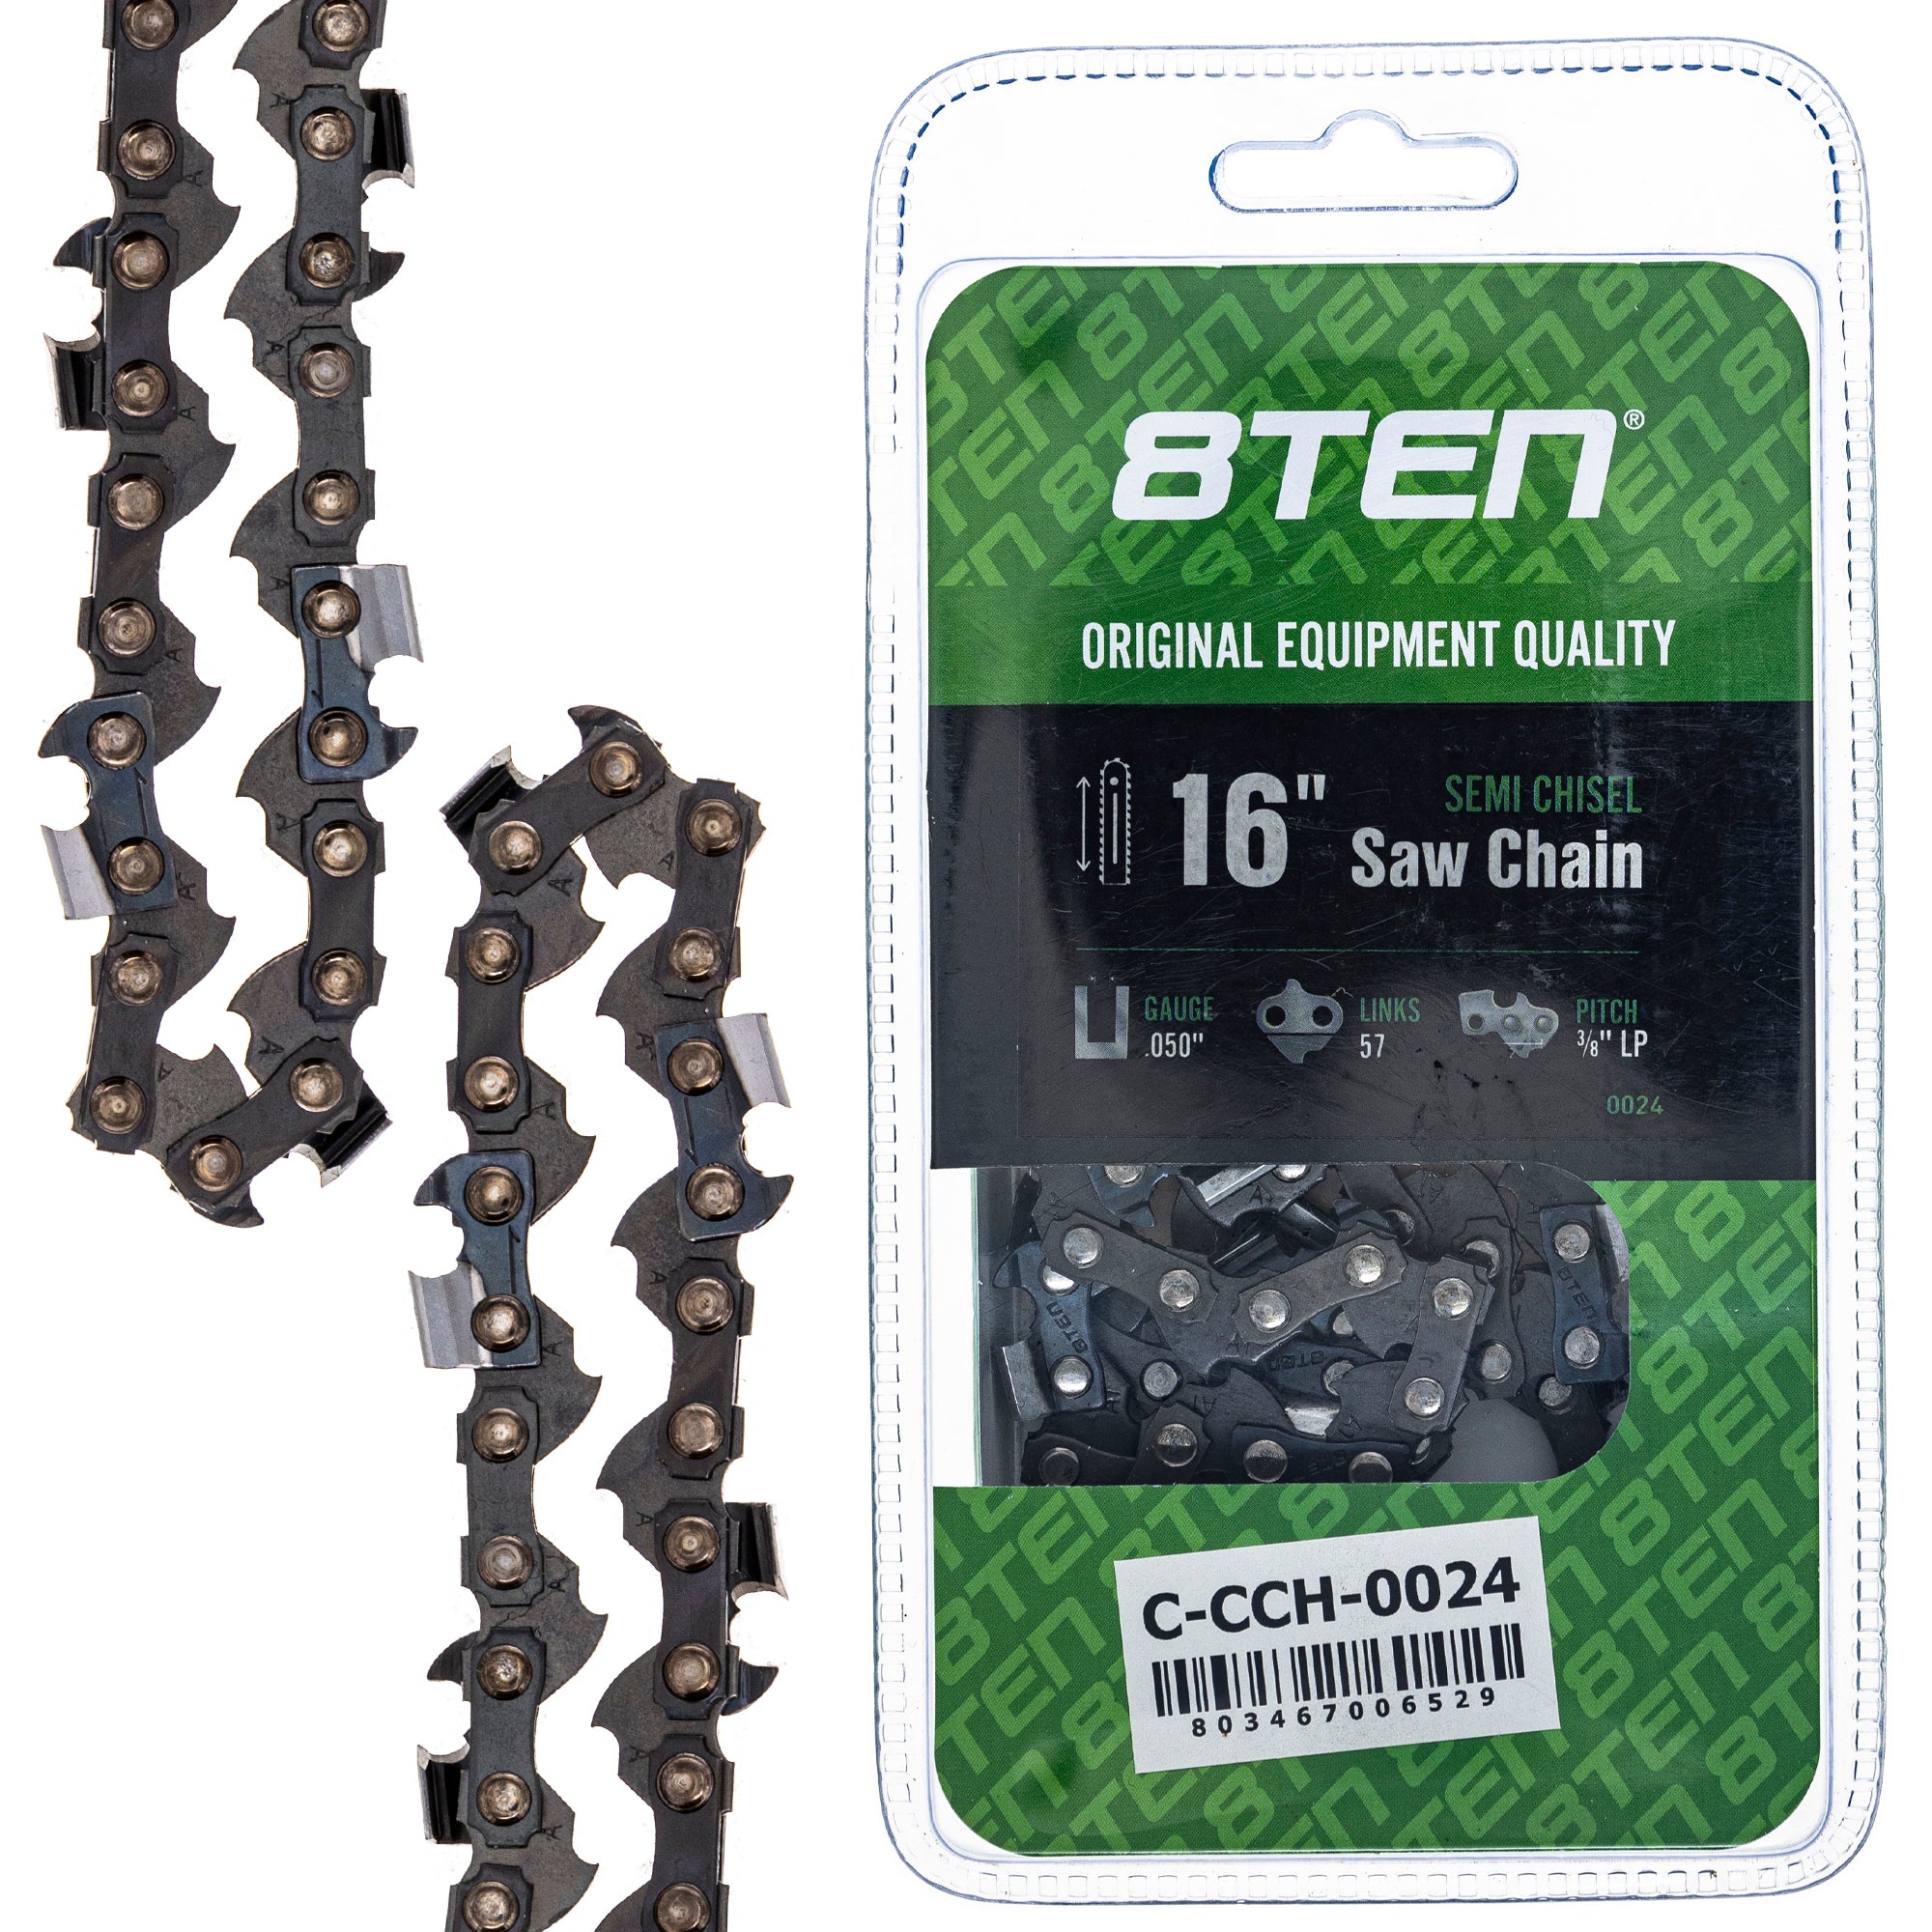 8TEN 810-CCC2246H Chain for zOTHER Windsor Stens Oregon GB Carlton